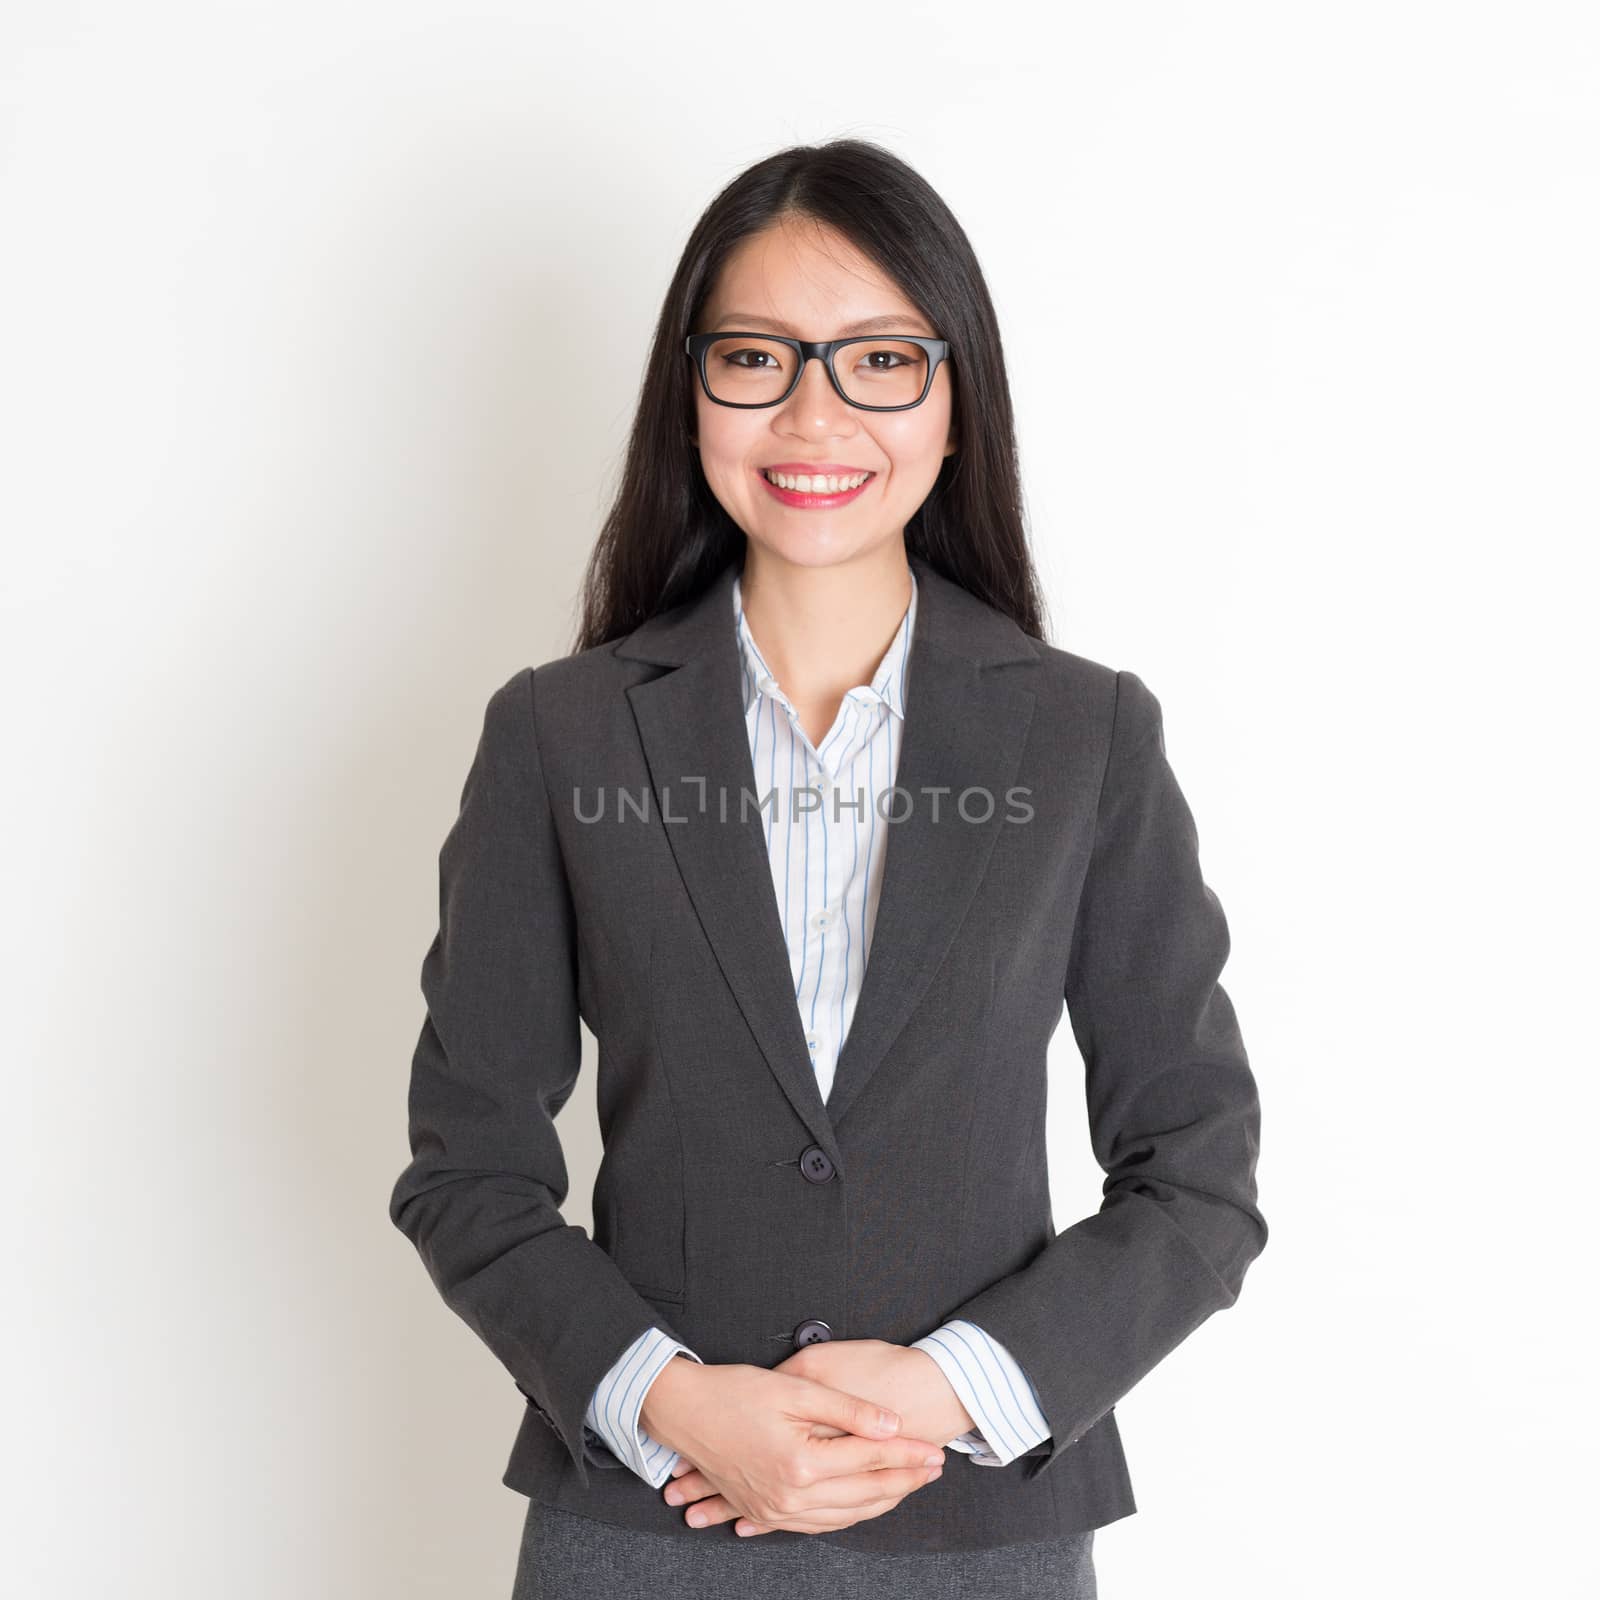 Asian business woman smiling at camera, standing on plain background.